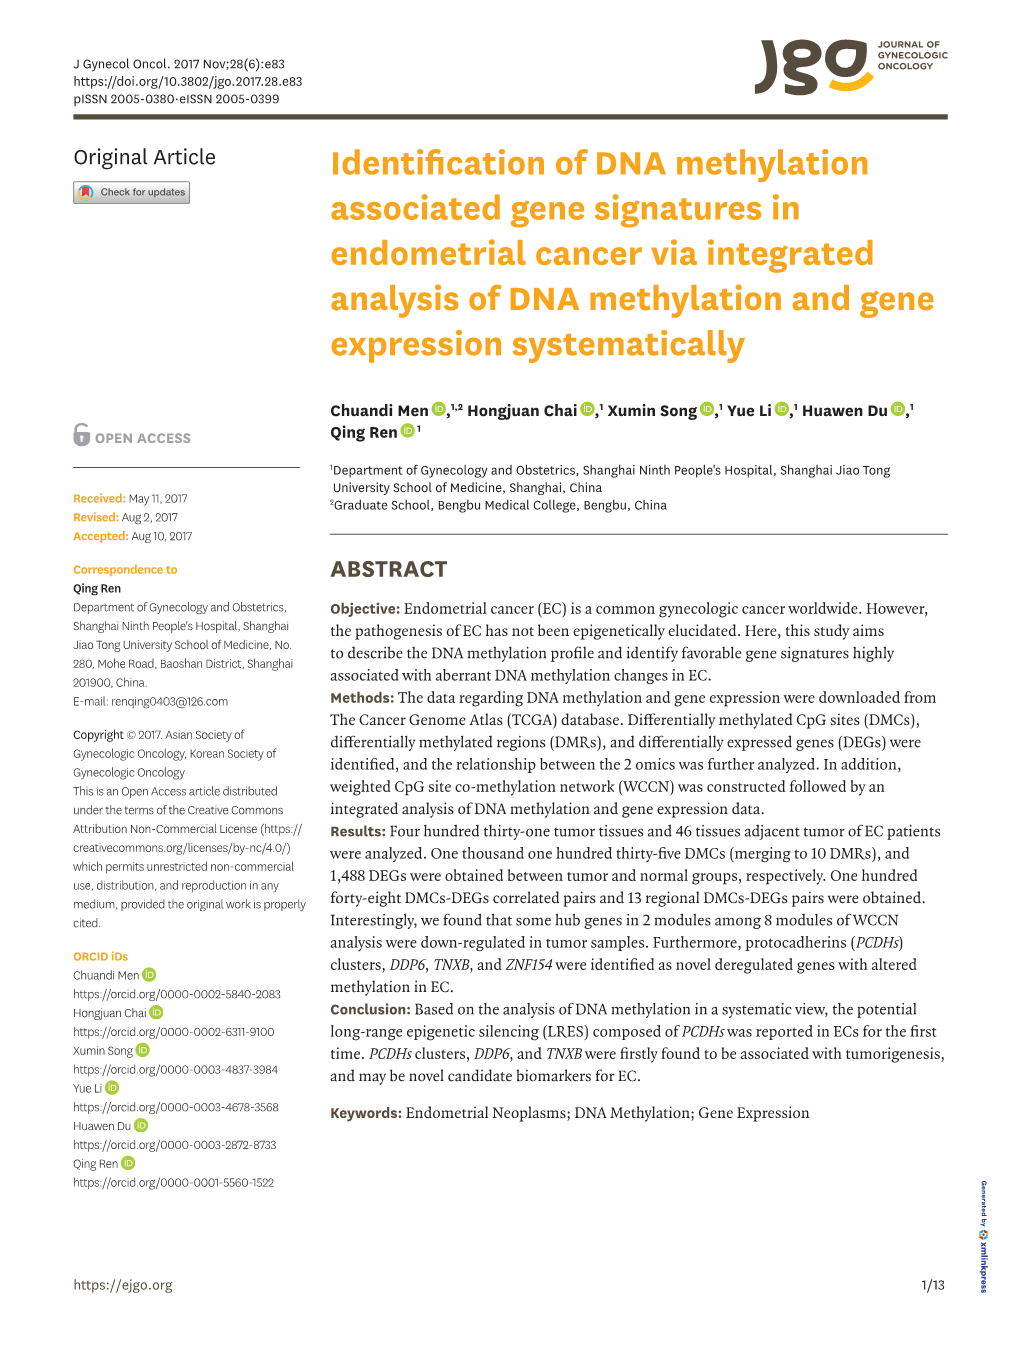 Identification of DNA Methylation Associated Gene Signatures in Endometrial Cancer Via Integrated Analysis of DNA Methylation and Gene Expression Systematically